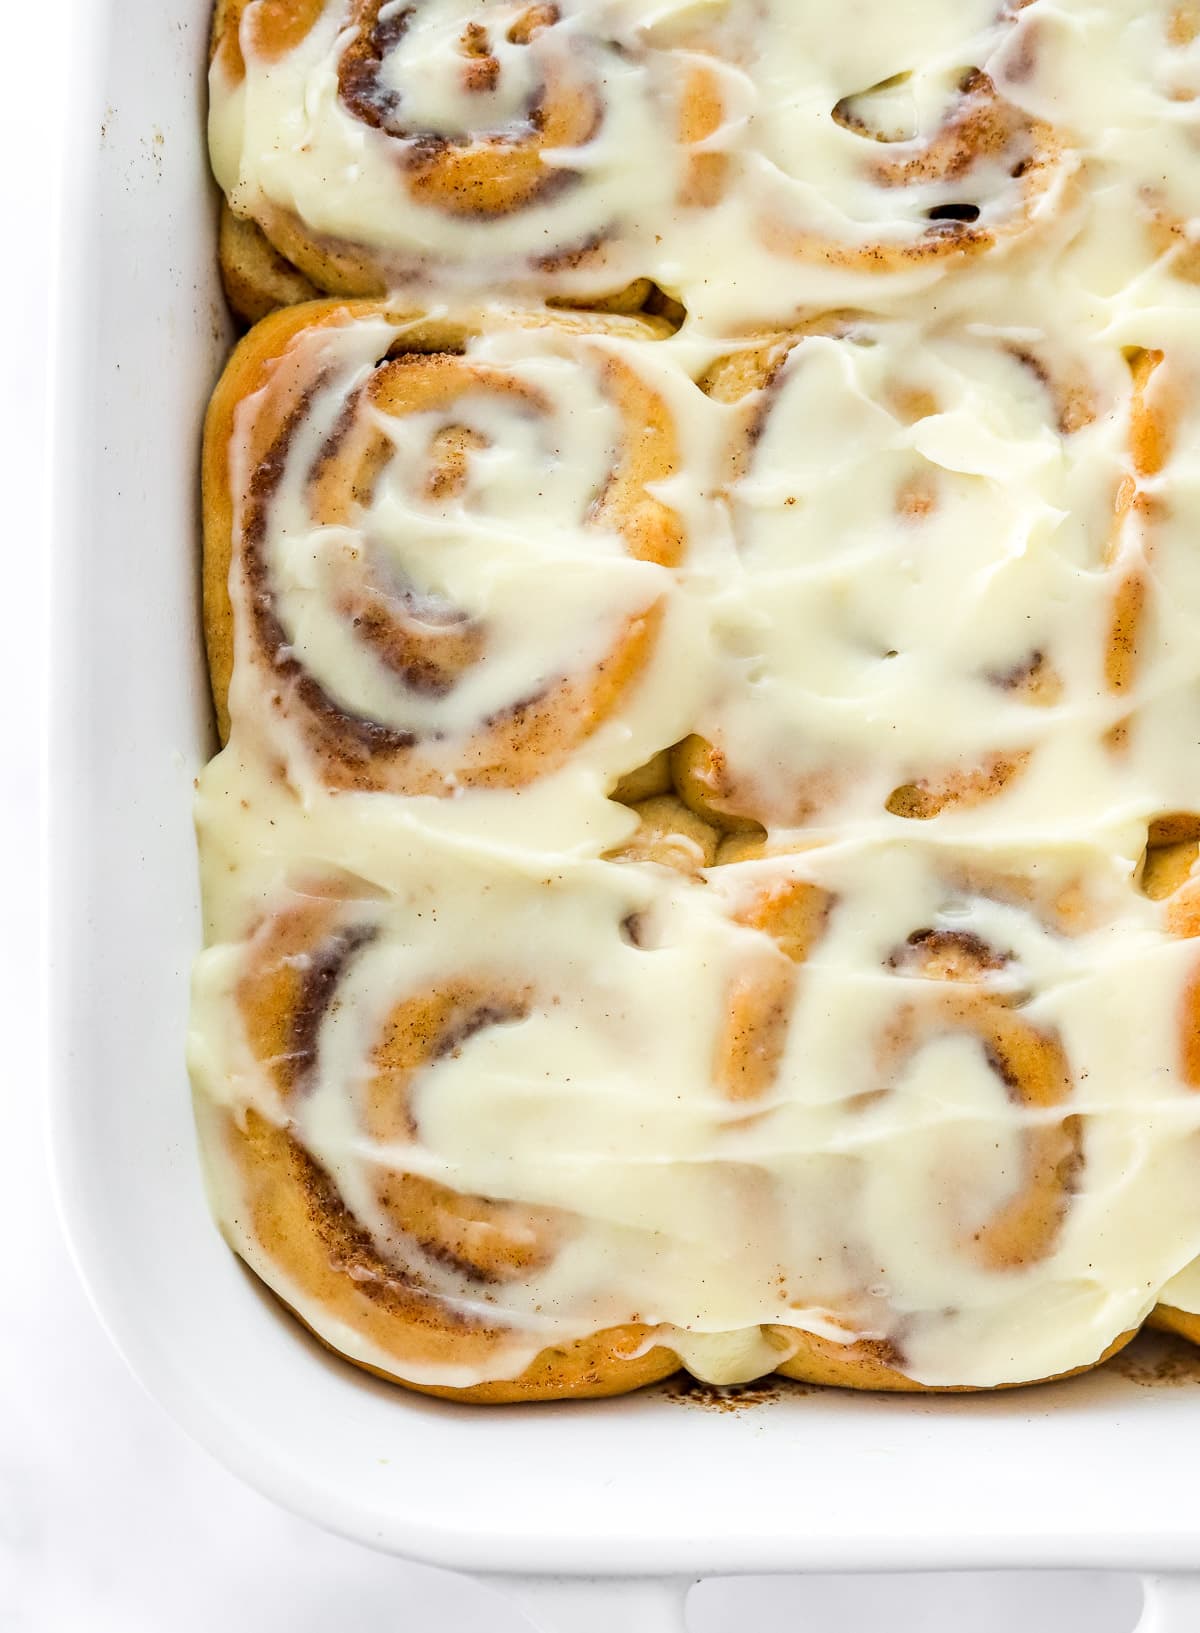 Healthy cinnamon rolls spread with frosting in baking pan.